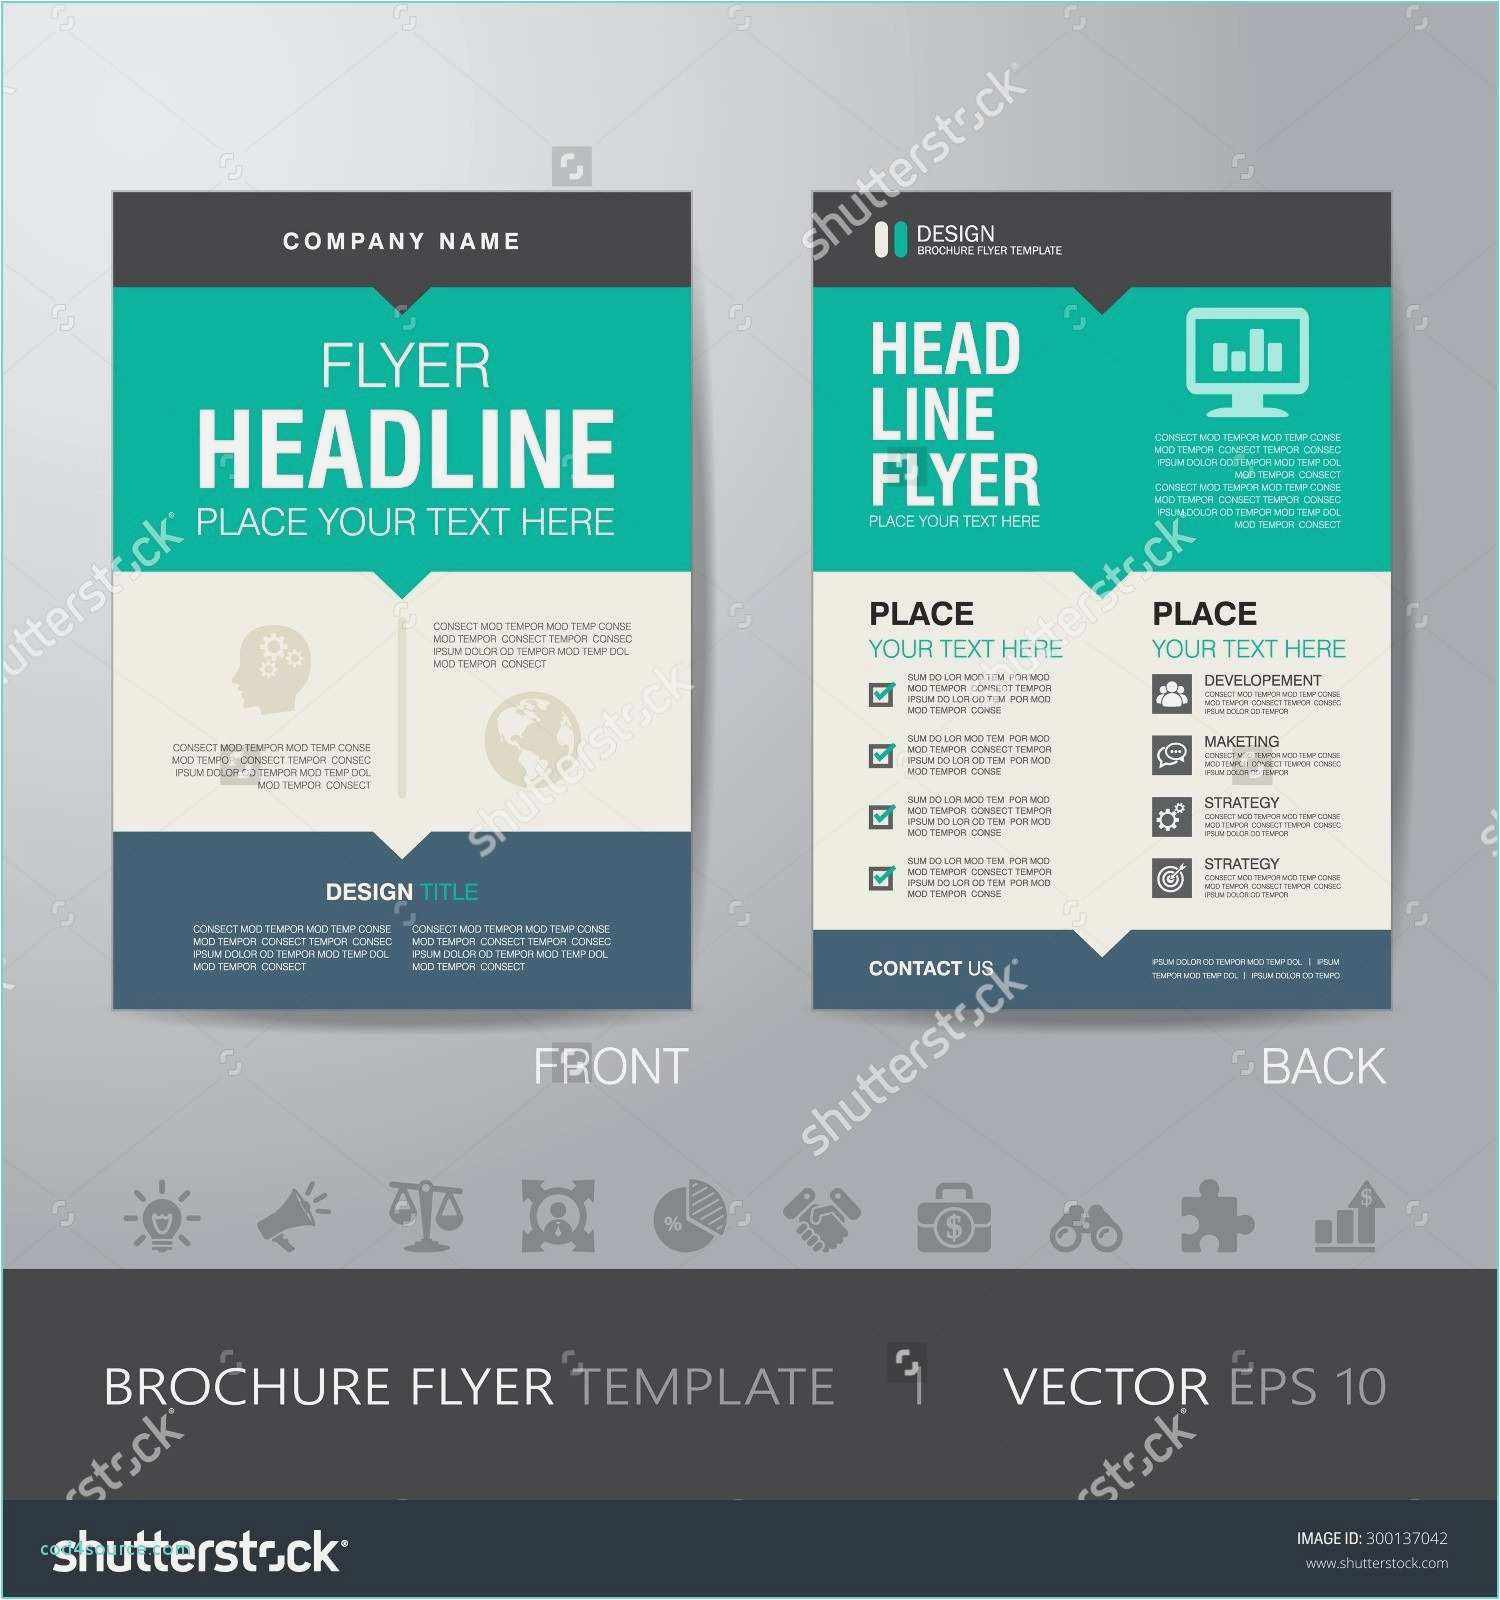 Free Download Free Business Cards Psd Templates Valid 20 Of Business Card Template Psd